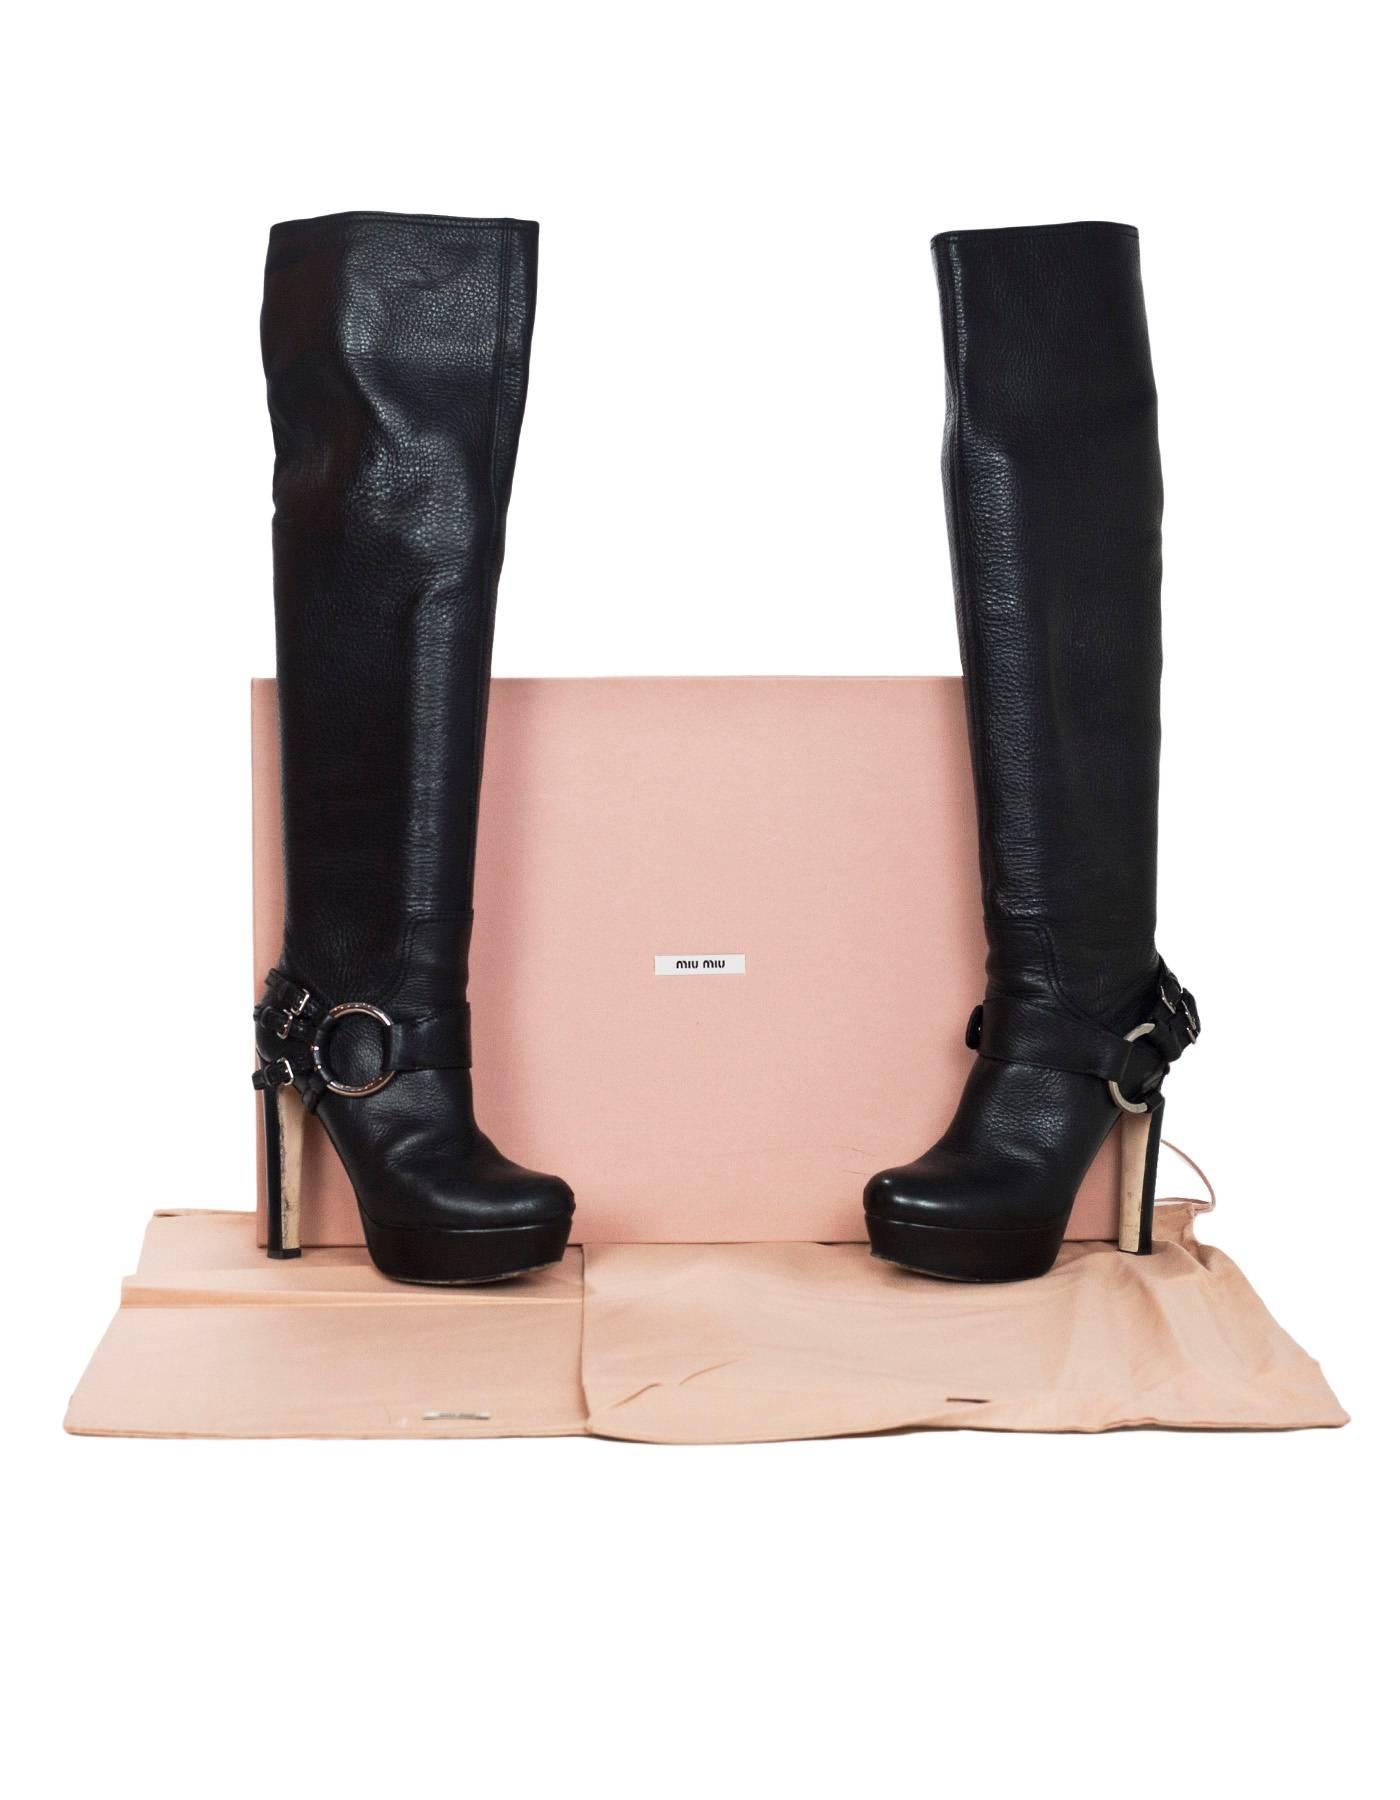 Women's Miu Miu Black Leather Over The Knee Boots Sz 38 with Box and DB